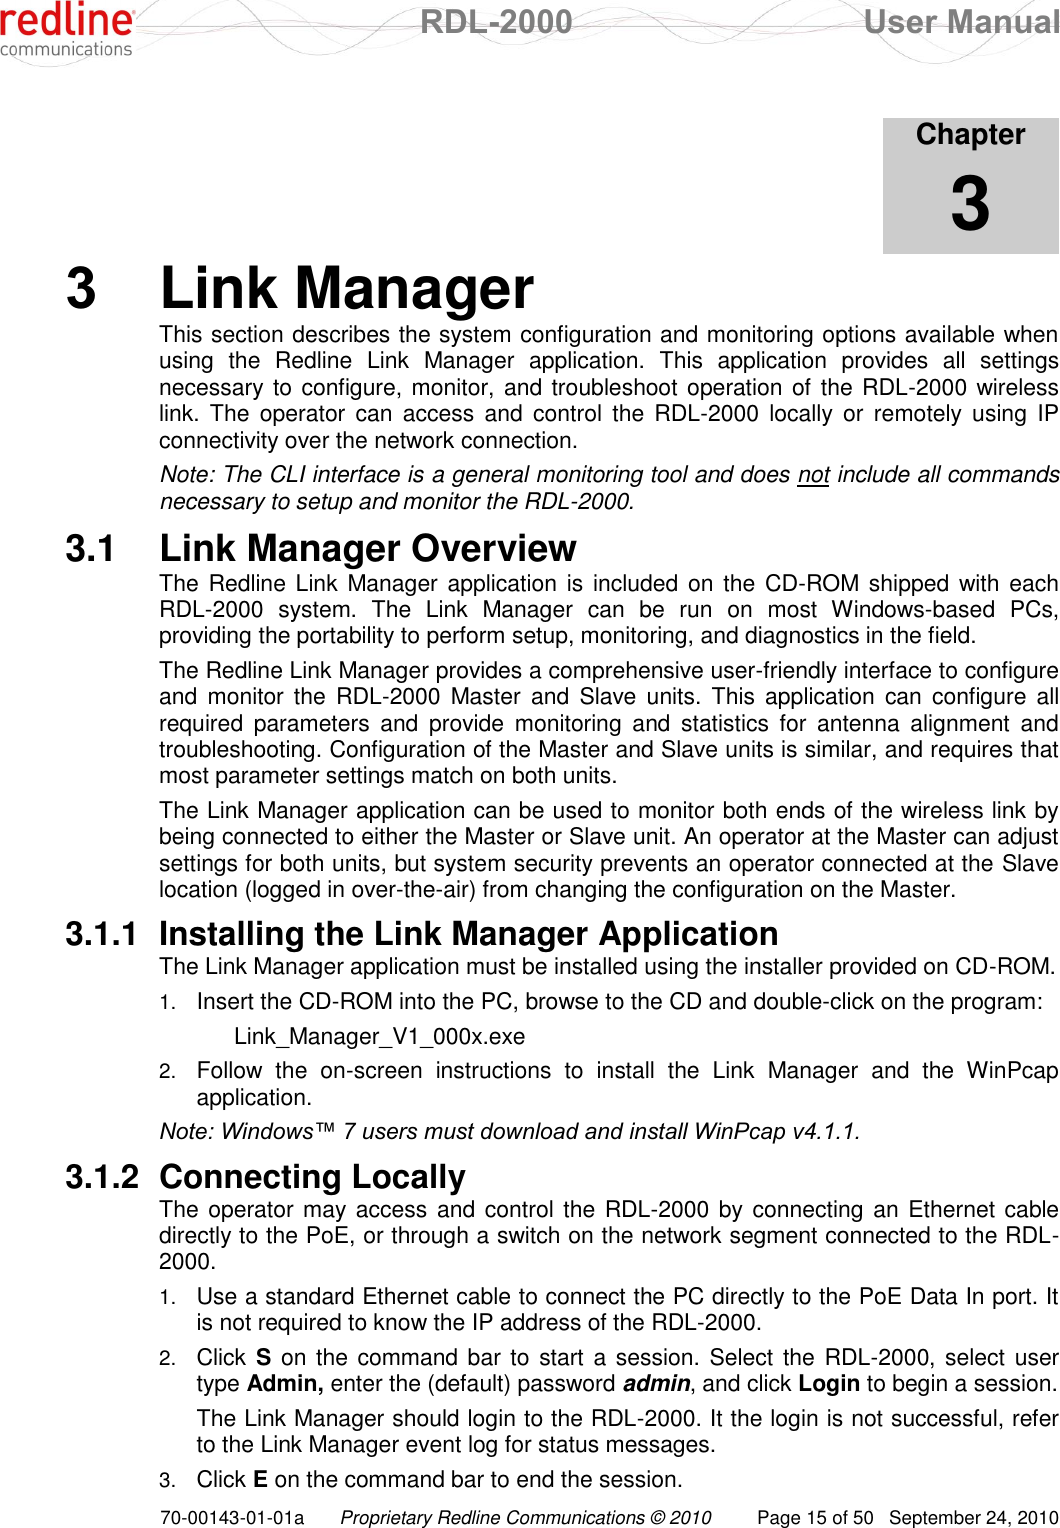  RDL-2000  User Manual 70-00143-01-01a Proprietary Redline Communications © 2010  Page 15 of 50  September 24, 2010            Chapter 3 3  Link Manager This section describes the system configuration and monitoring options available when using  the  Redline  Link  Manager  application.  This  application  provides  all  settings necessary to configure, monitor, and troubleshoot operation of the RDL-2000 wireless link.  The  operator  can  access  and  control  the  RDL-2000  locally  or  remotely  using  IP connectivity over the network connection.  Note: The CLI interface is a general monitoring tool and does not include all commands necessary to setup and monitor the RDL-2000. 3.1  Link Manager Overview The Redline Link  Manager application is  included on the CD-ROM shipped with each RDL-2000  system.  The  Link  Manager  can  be  run  on  most  Windows-based  PCs, providing the portability to perform setup, monitoring, and diagnostics in the field.  The Redline Link Manager provides a comprehensive user-friendly interface to configure and  monitor the RDL-2000  Master  and  Slave  units.  This  application  can configure  all required  parameters  and  provide  monitoring  and  statistics  for  antenna  alignment  and troubleshooting. Configuration of the Master and Slave units is similar, and requires that most parameter settings match on both units. The Link Manager application can be used to monitor both ends of the wireless link by being connected to either the Master or Slave unit. An operator at the Master can adjust settings for both units, but system security prevents an operator connected at the Slave location (logged in over-the-air) from changing the configuration on the Master. 3.1.1  Installing the Link Manager Application The Link Manager application must be installed using the installer provided on CD-ROM. 1. Insert the CD-ROM into the PC, browse to the CD and double-click on the program:   Link_Manager_V1_000x.exe 2. Follow  the  on-screen  instructions  to  install  the  Link  Manager  and  the  WinPcap application. Note: Windows™ 7 users must download and install WinPcap v4.1.1. 3.1.2  Connecting Locally The operator may access and control the RDL-2000 by connecting an Ethernet  cable directly to the PoE, or through a switch on the network segment connected to the RDL-2000. 1. Use a standard Ethernet cable to connect the PC directly to the PoE Data In port. It is not required to know the IP address of the RDL-2000. 2. Click S on the command bar to start a session. Select  the RDL-2000, select user type Admin, enter the (default) password admin, and click Login to begin a session.   The Link Manager should login to the RDL-2000. It the login is not successful, refer to the Link Manager event log for status messages. 3. Click E on the command bar to end the session. 